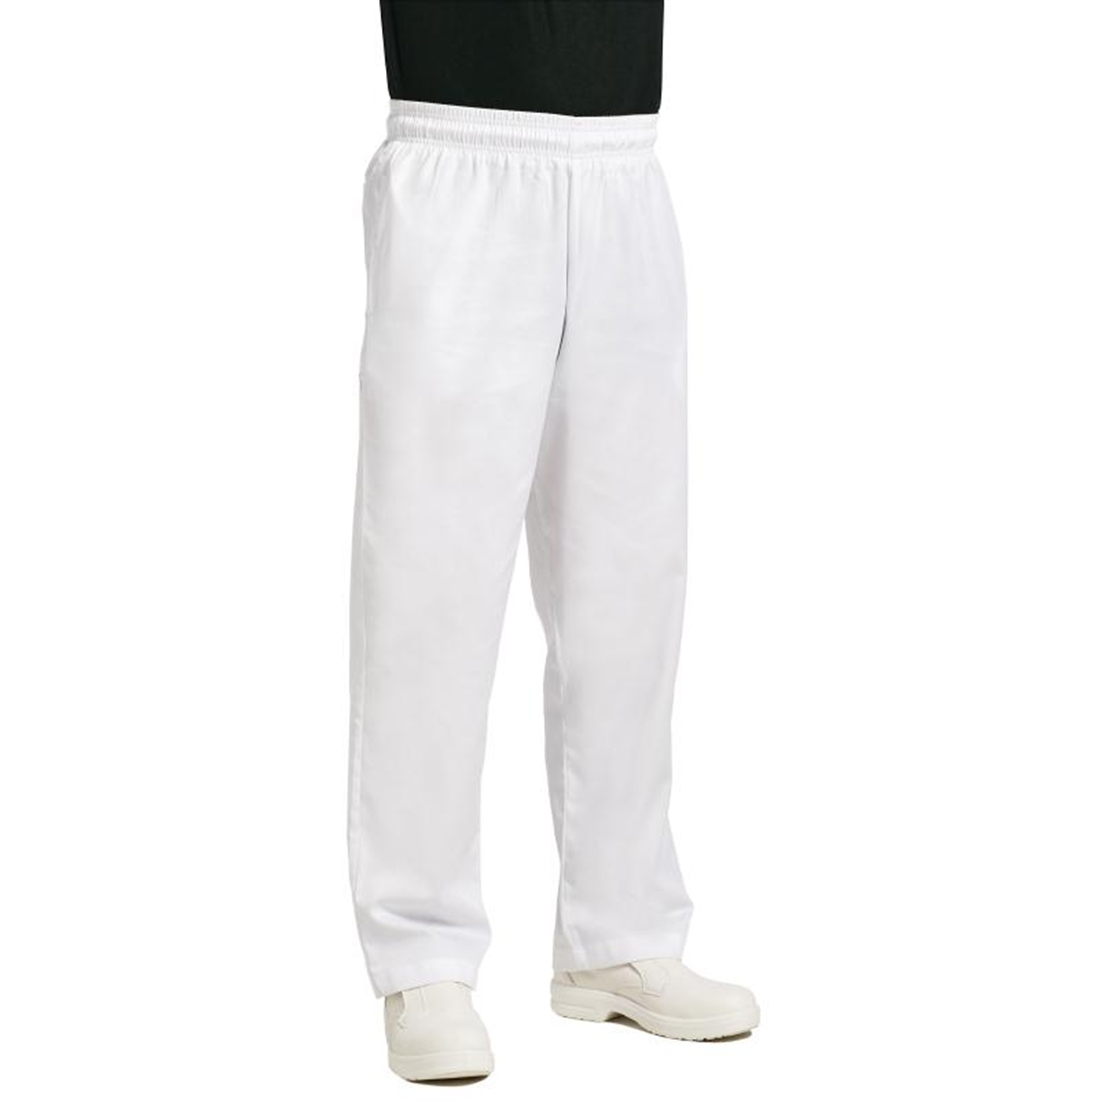 Chef Works Unisex Easyfit Chefs Trousers White 2XL